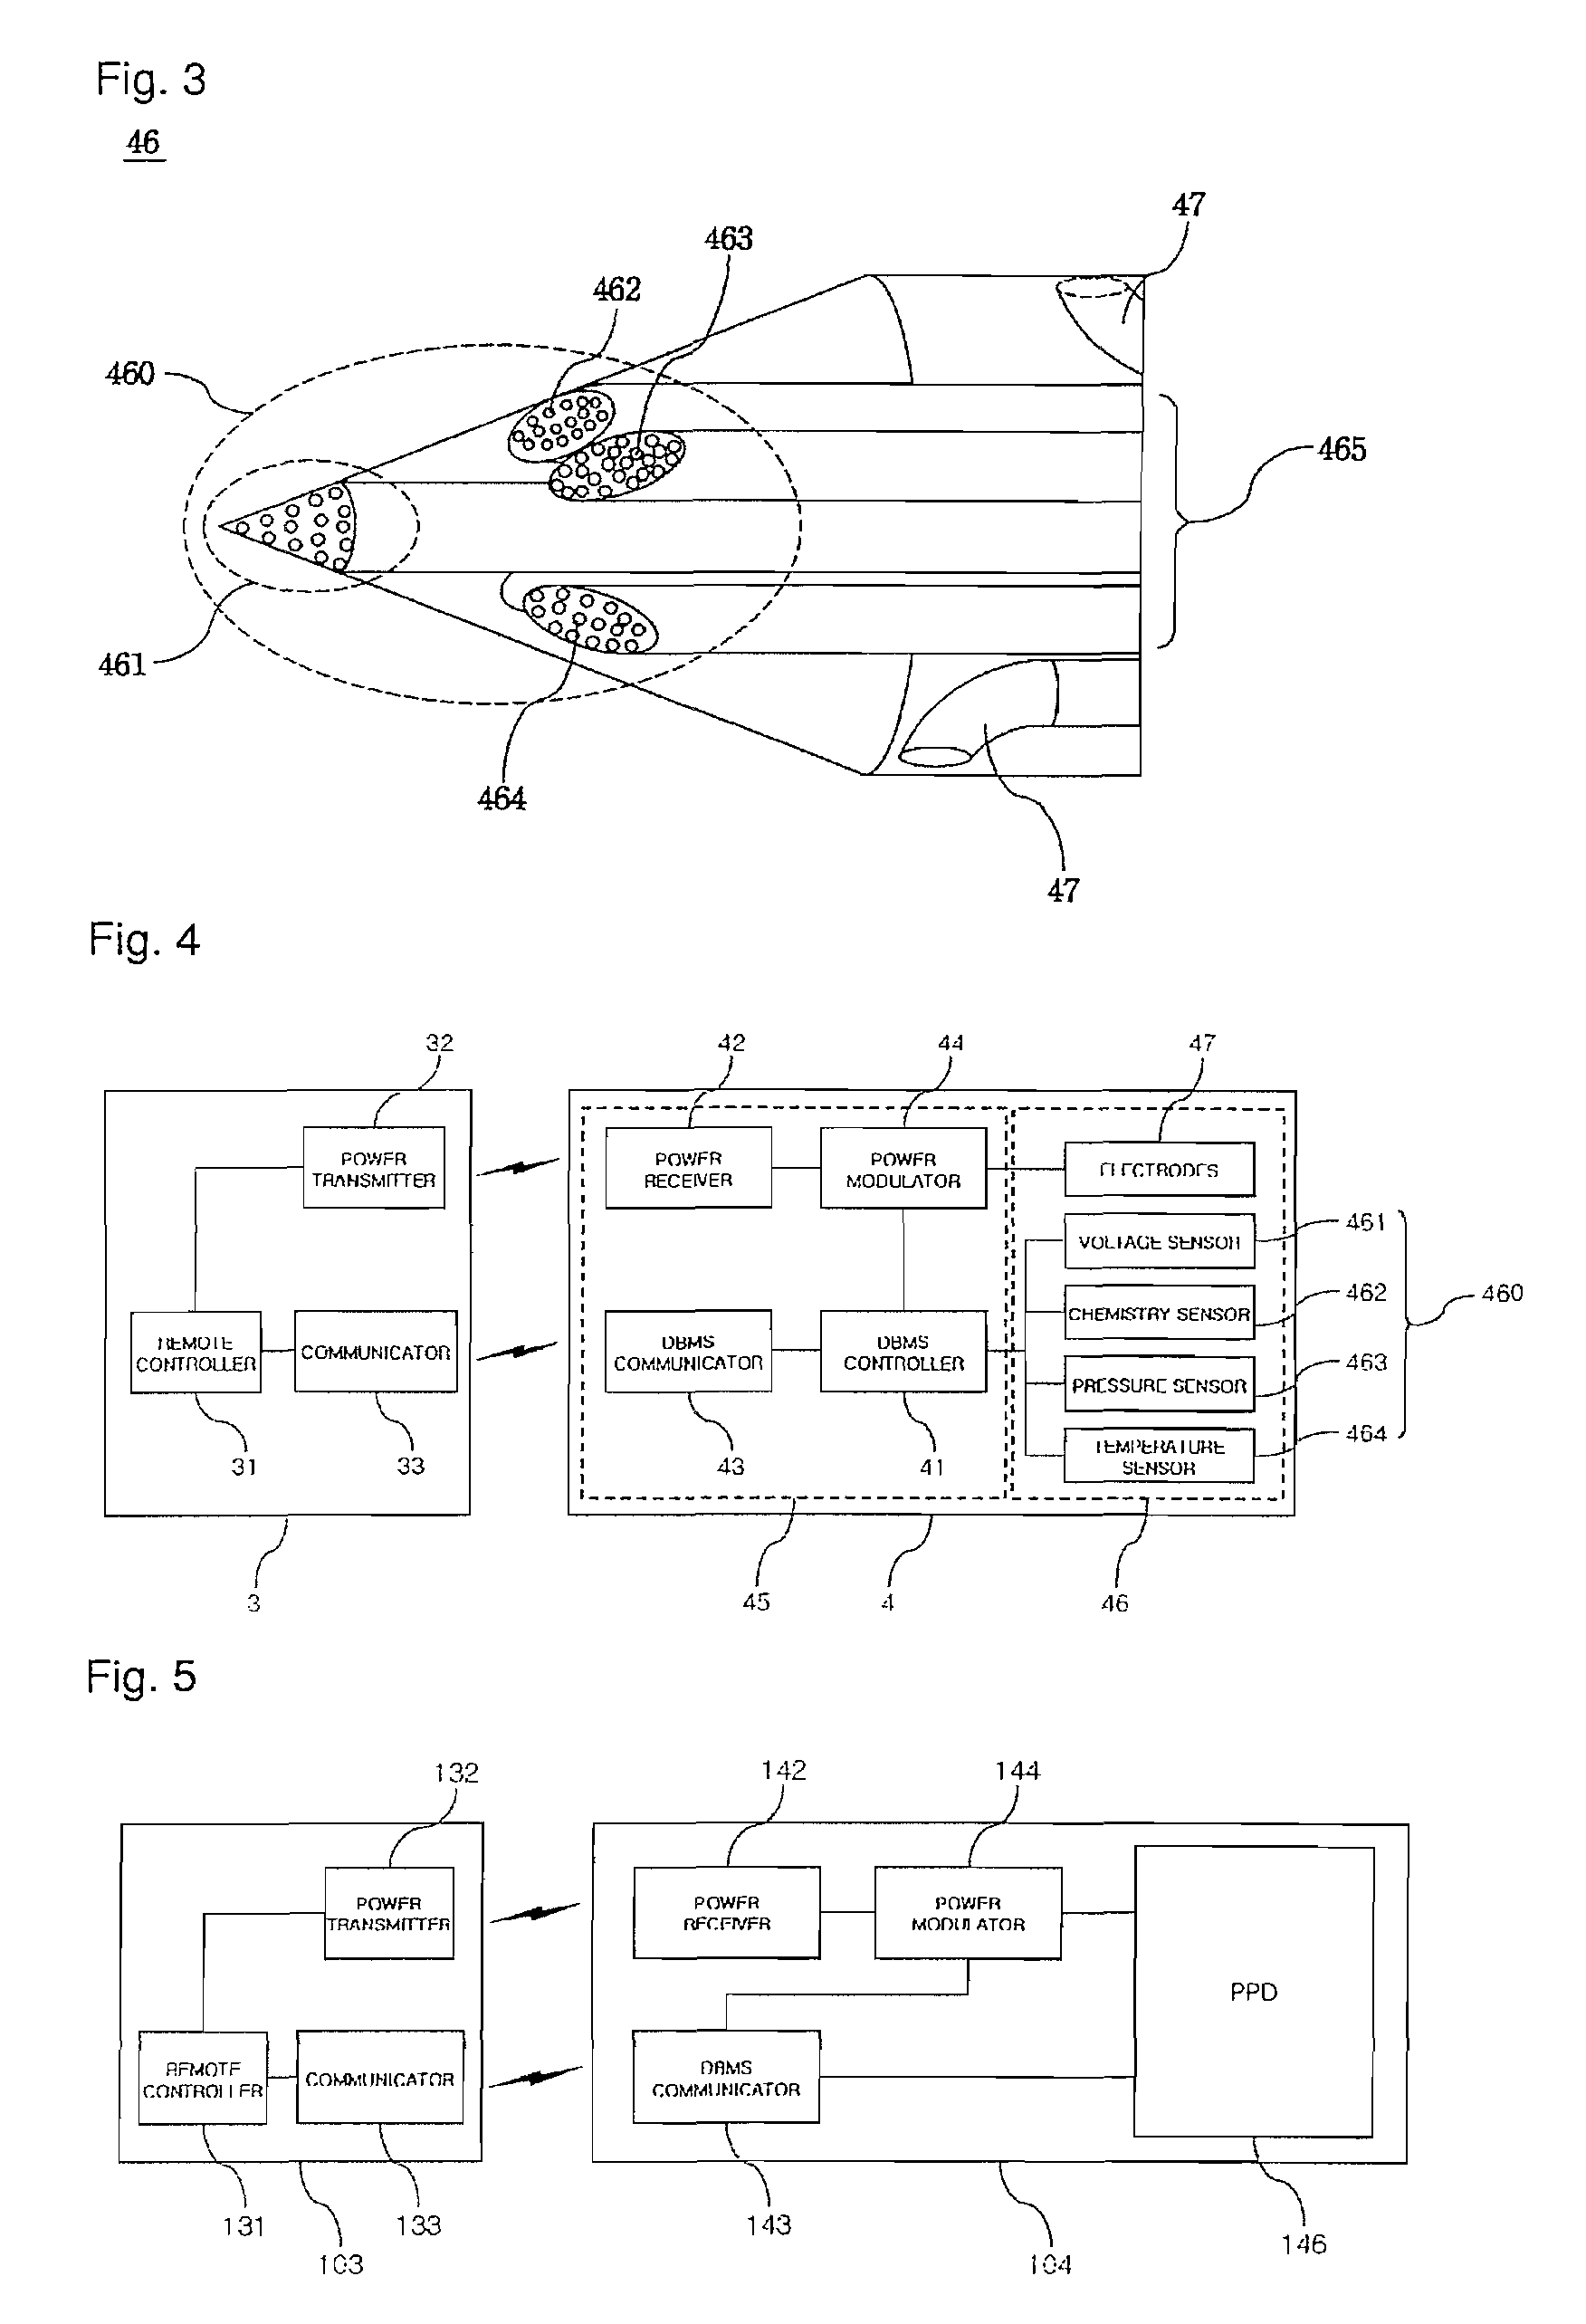 Neural electronic interface device for motor and sensory controls of human body